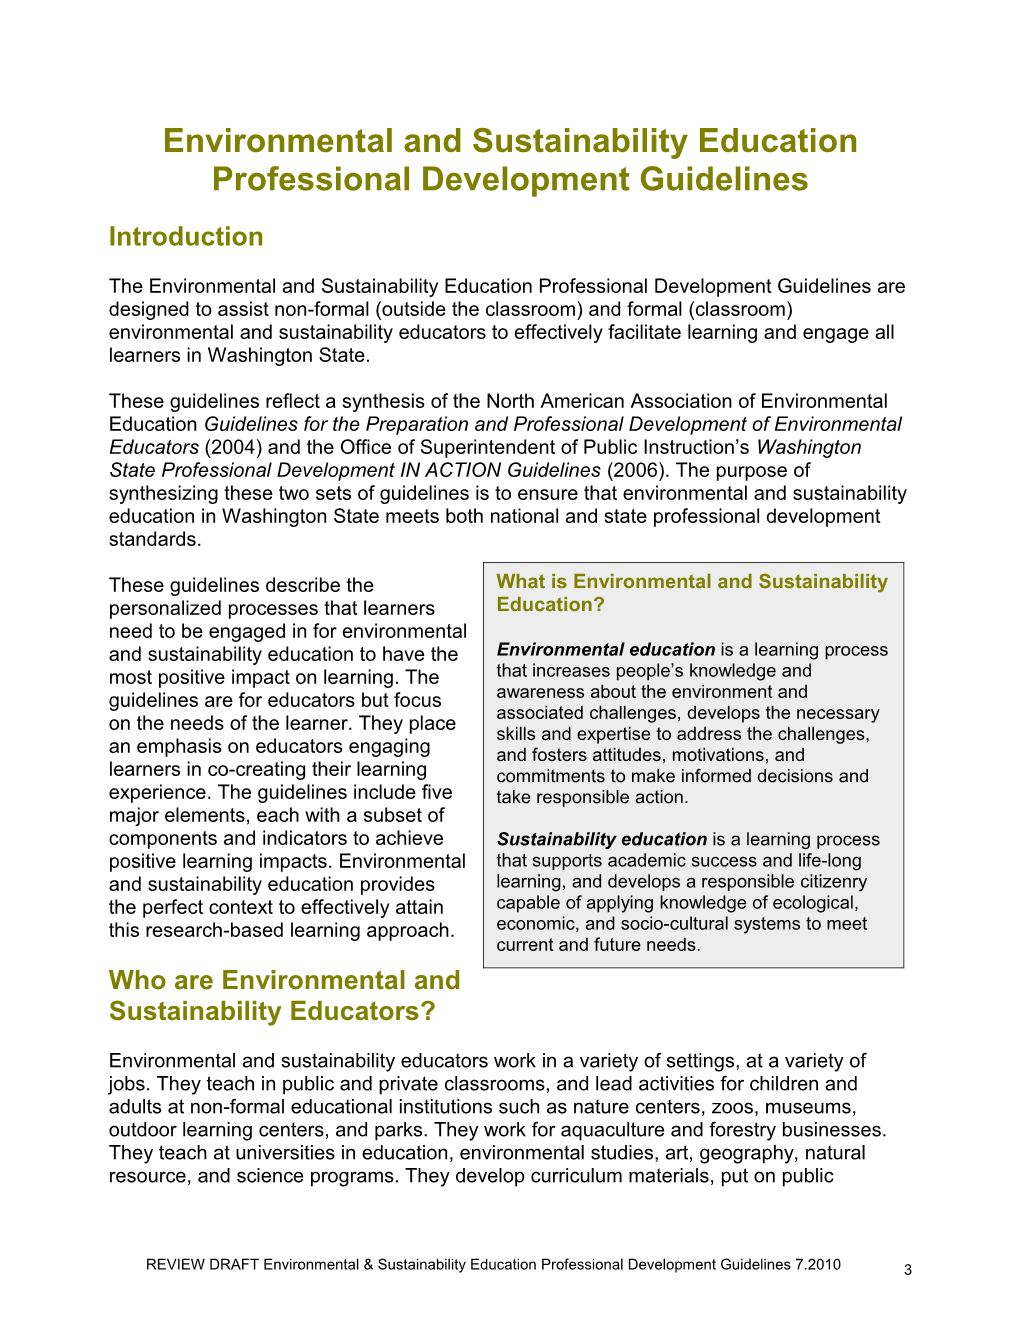 EES PD Guidelines